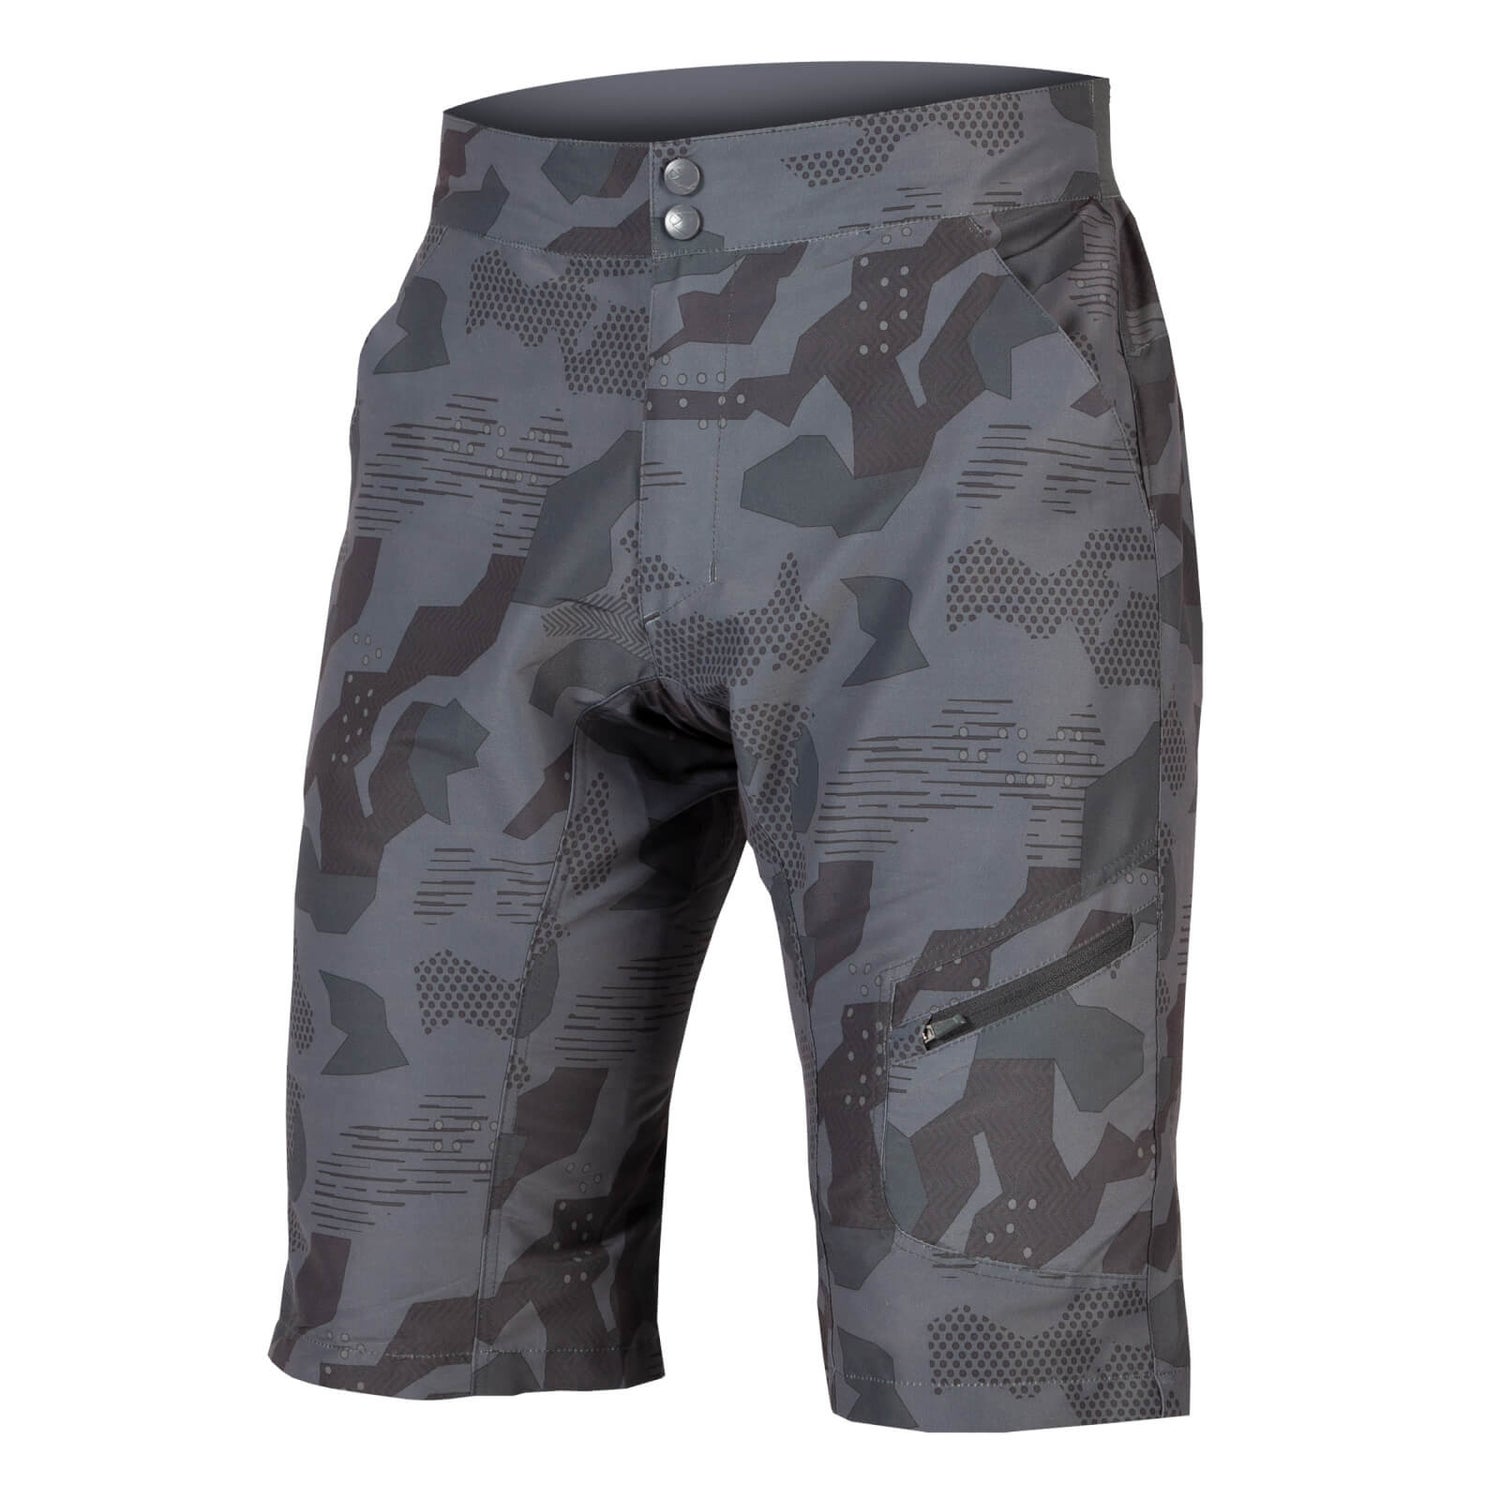 Hummvee Lite Short with Liner - Tonal Anthracite